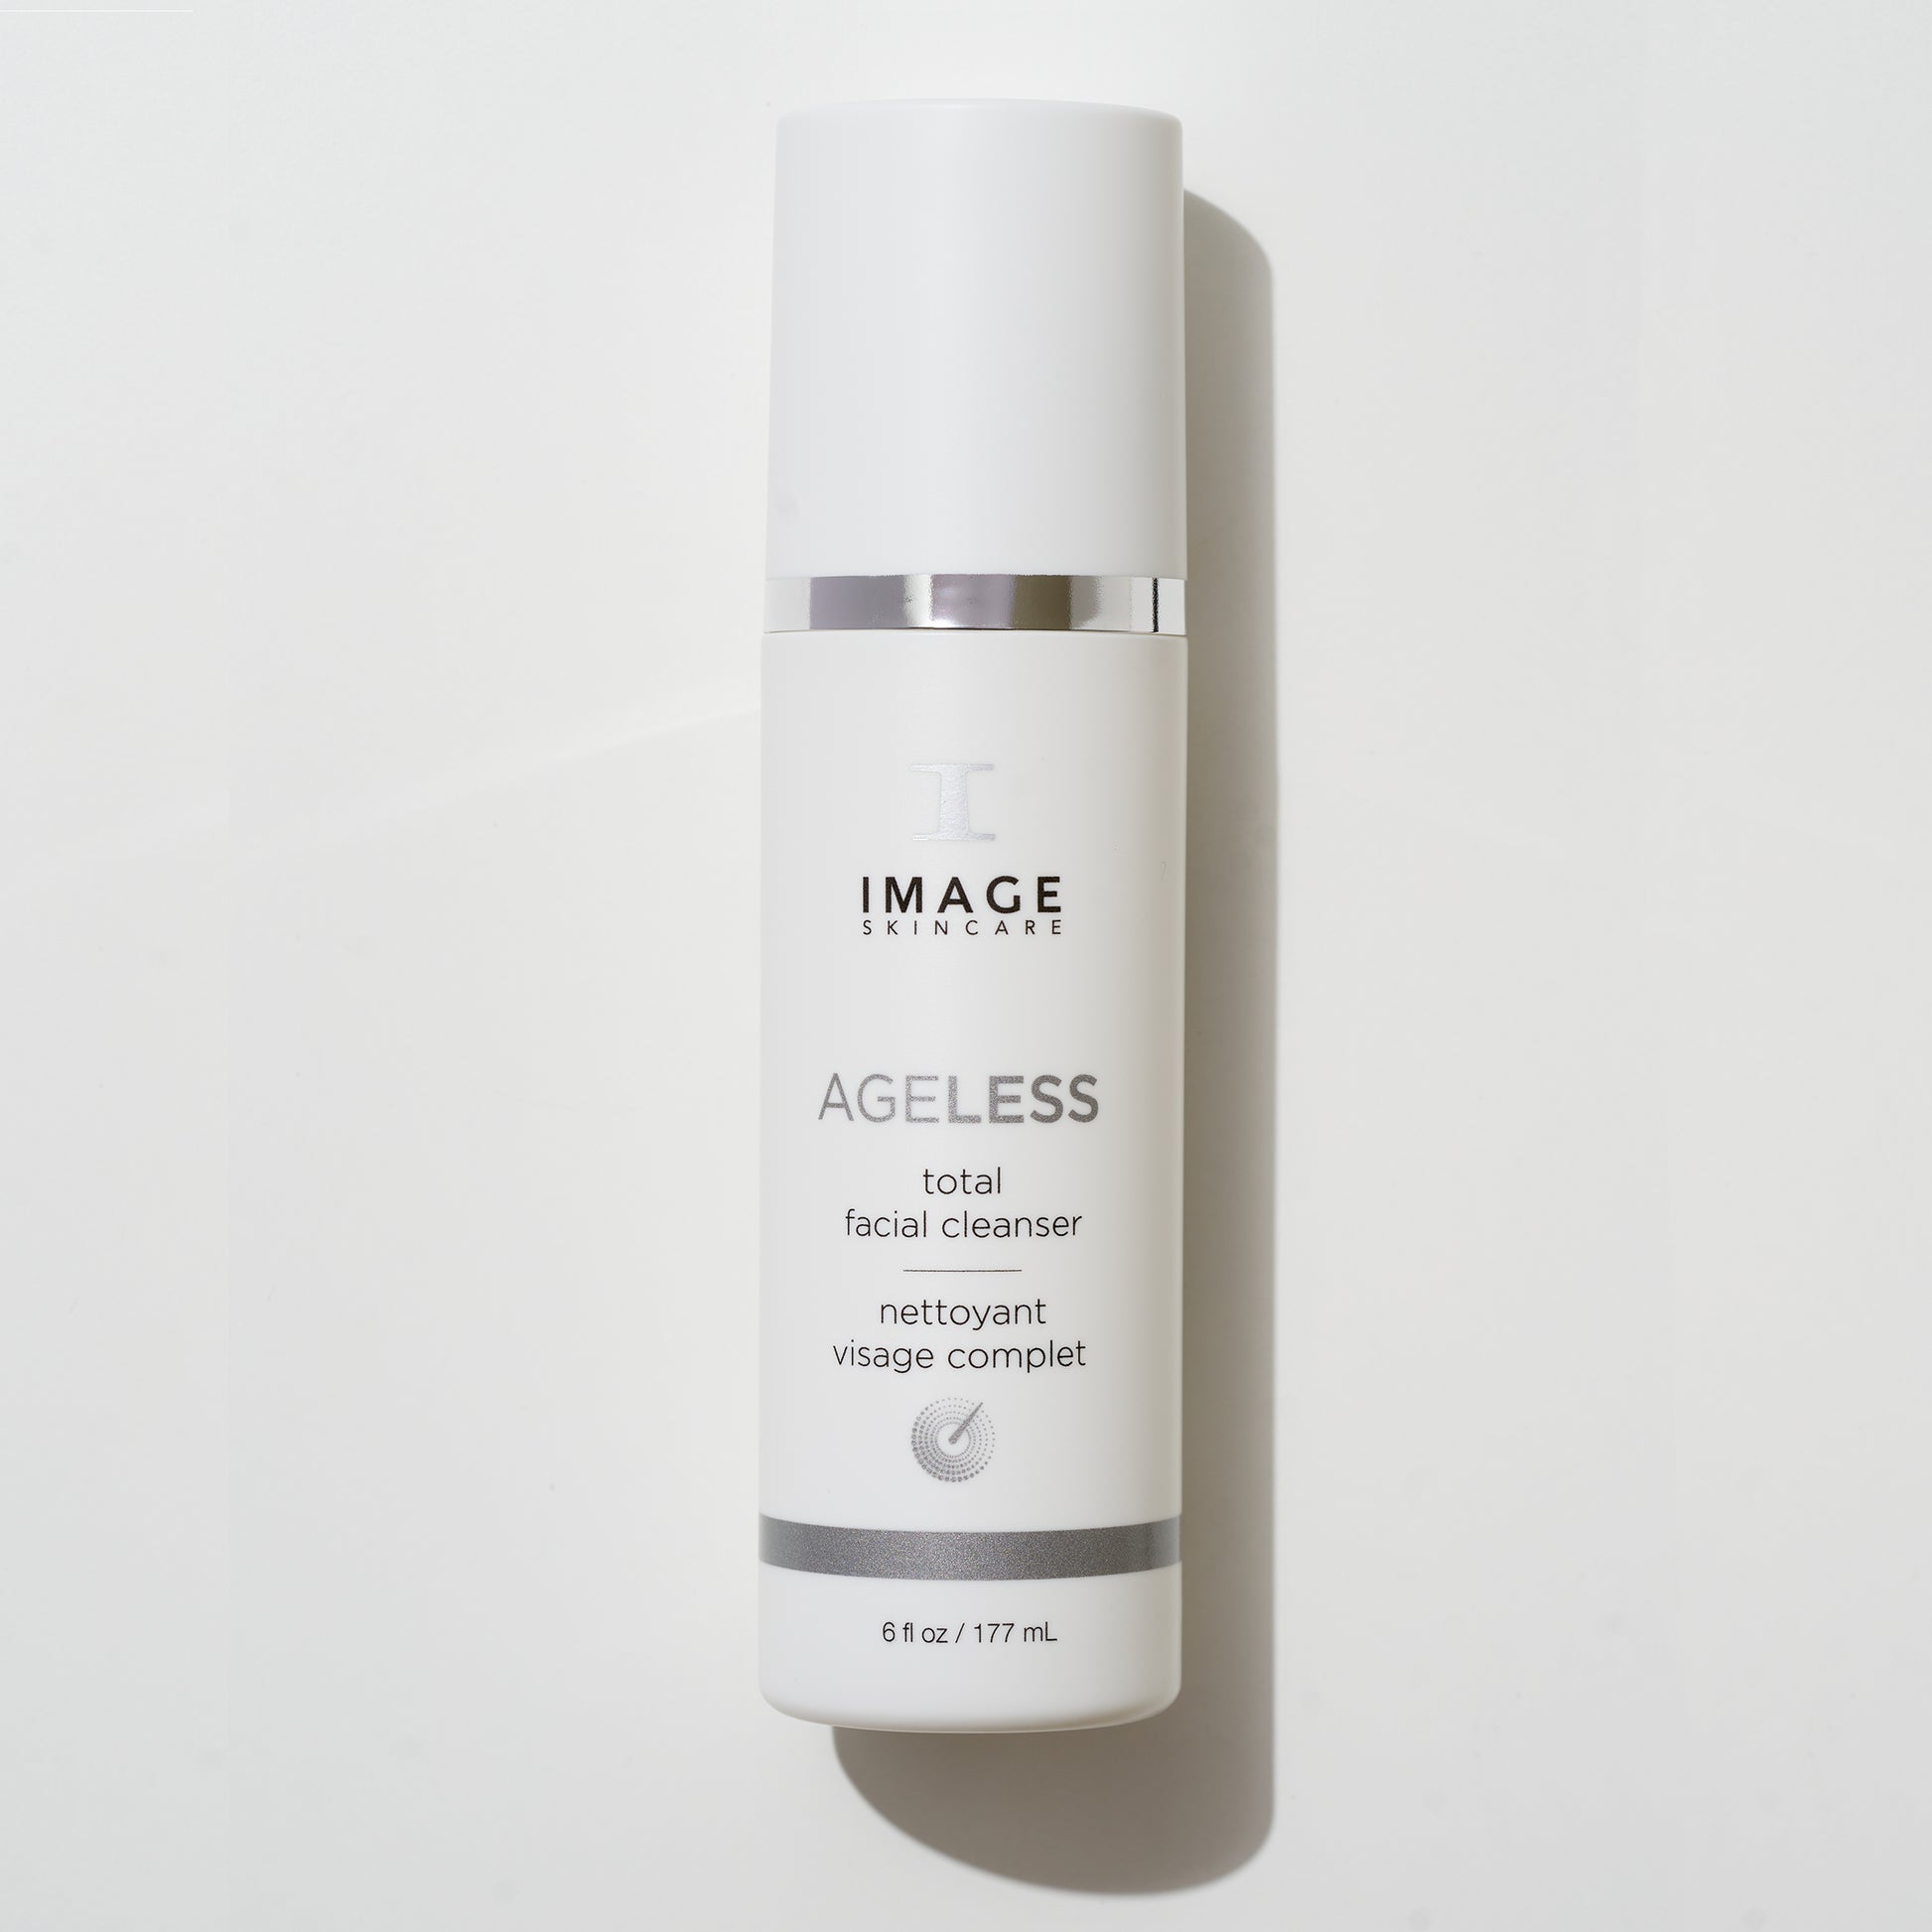 AGELESS Total Facial Cleanser, Image Skincare